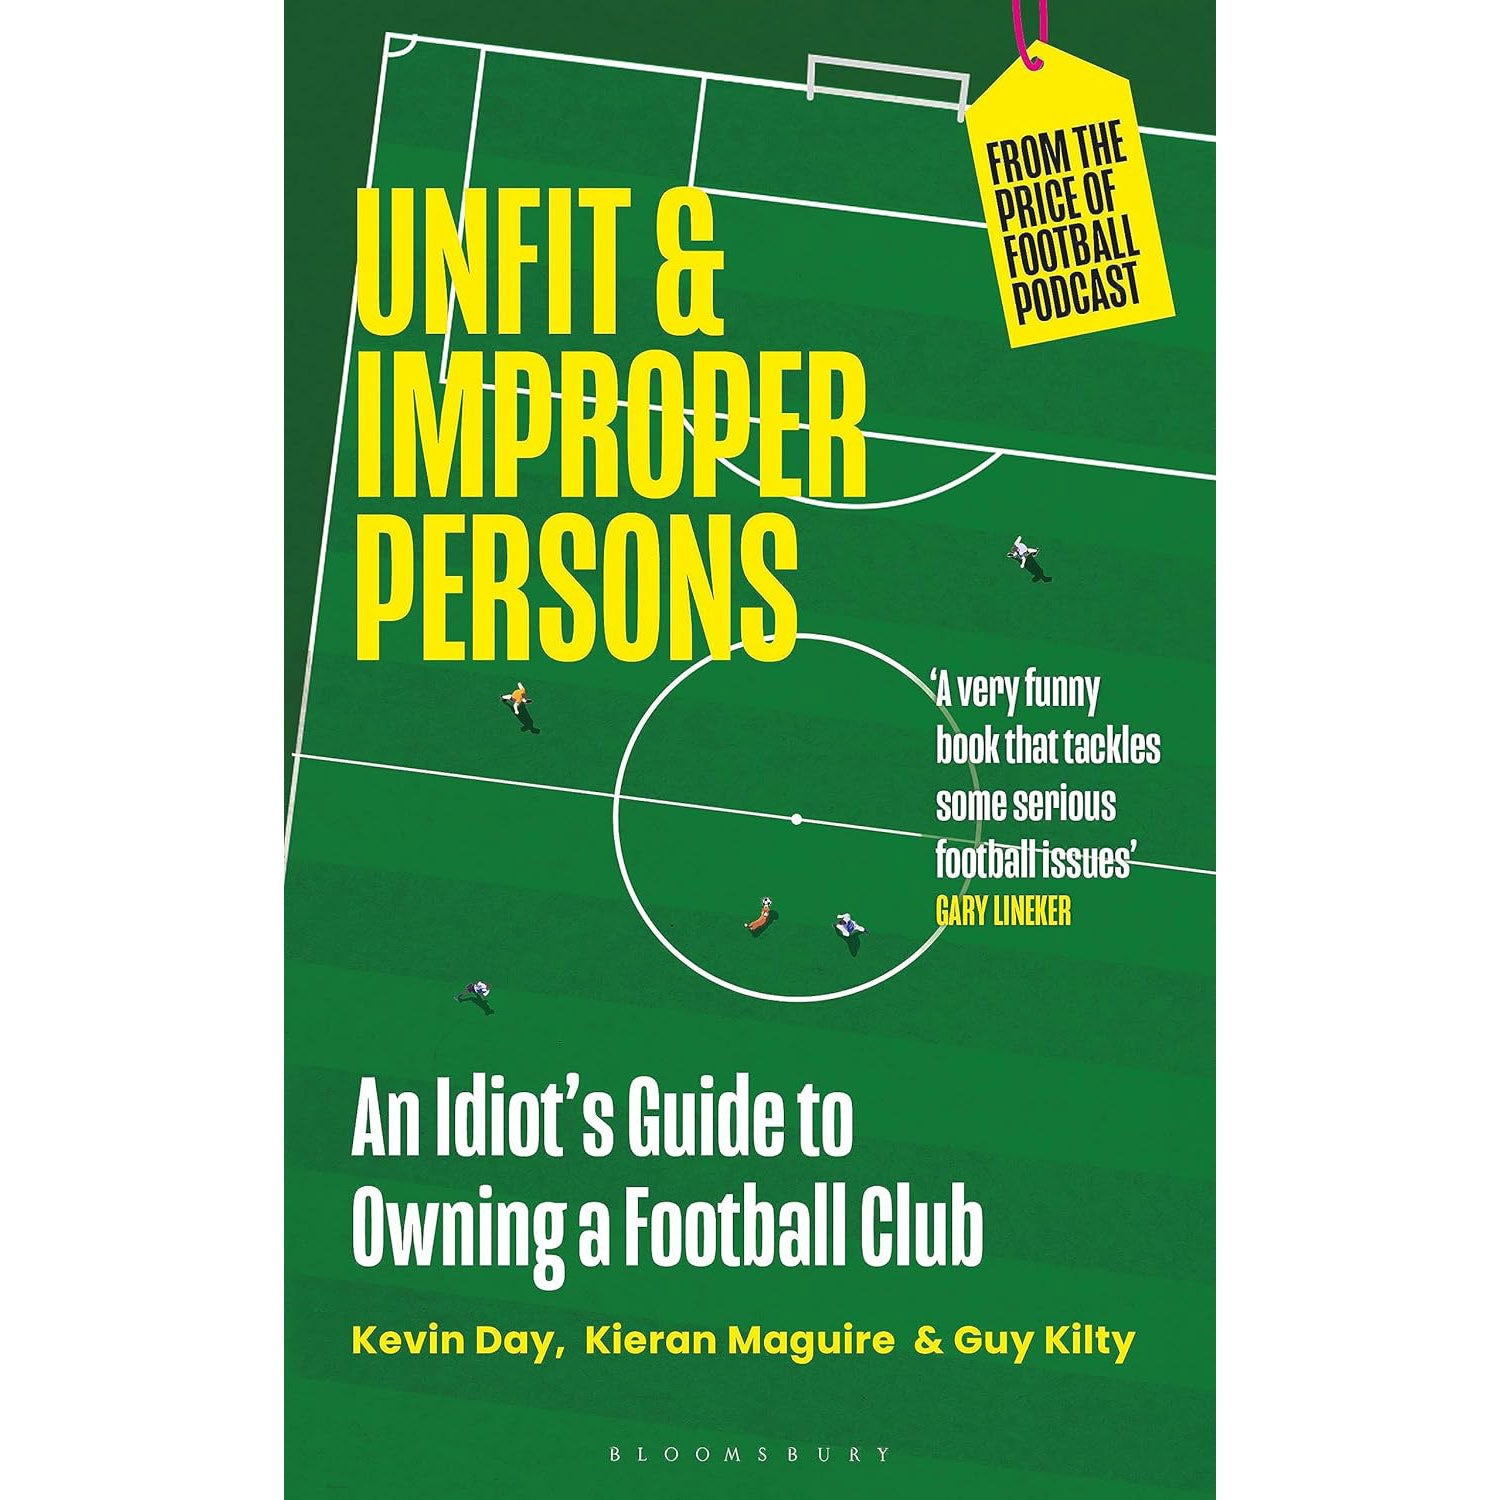 Unfit & Improper Persons – An Idiot's Guide to Owning a Football Club